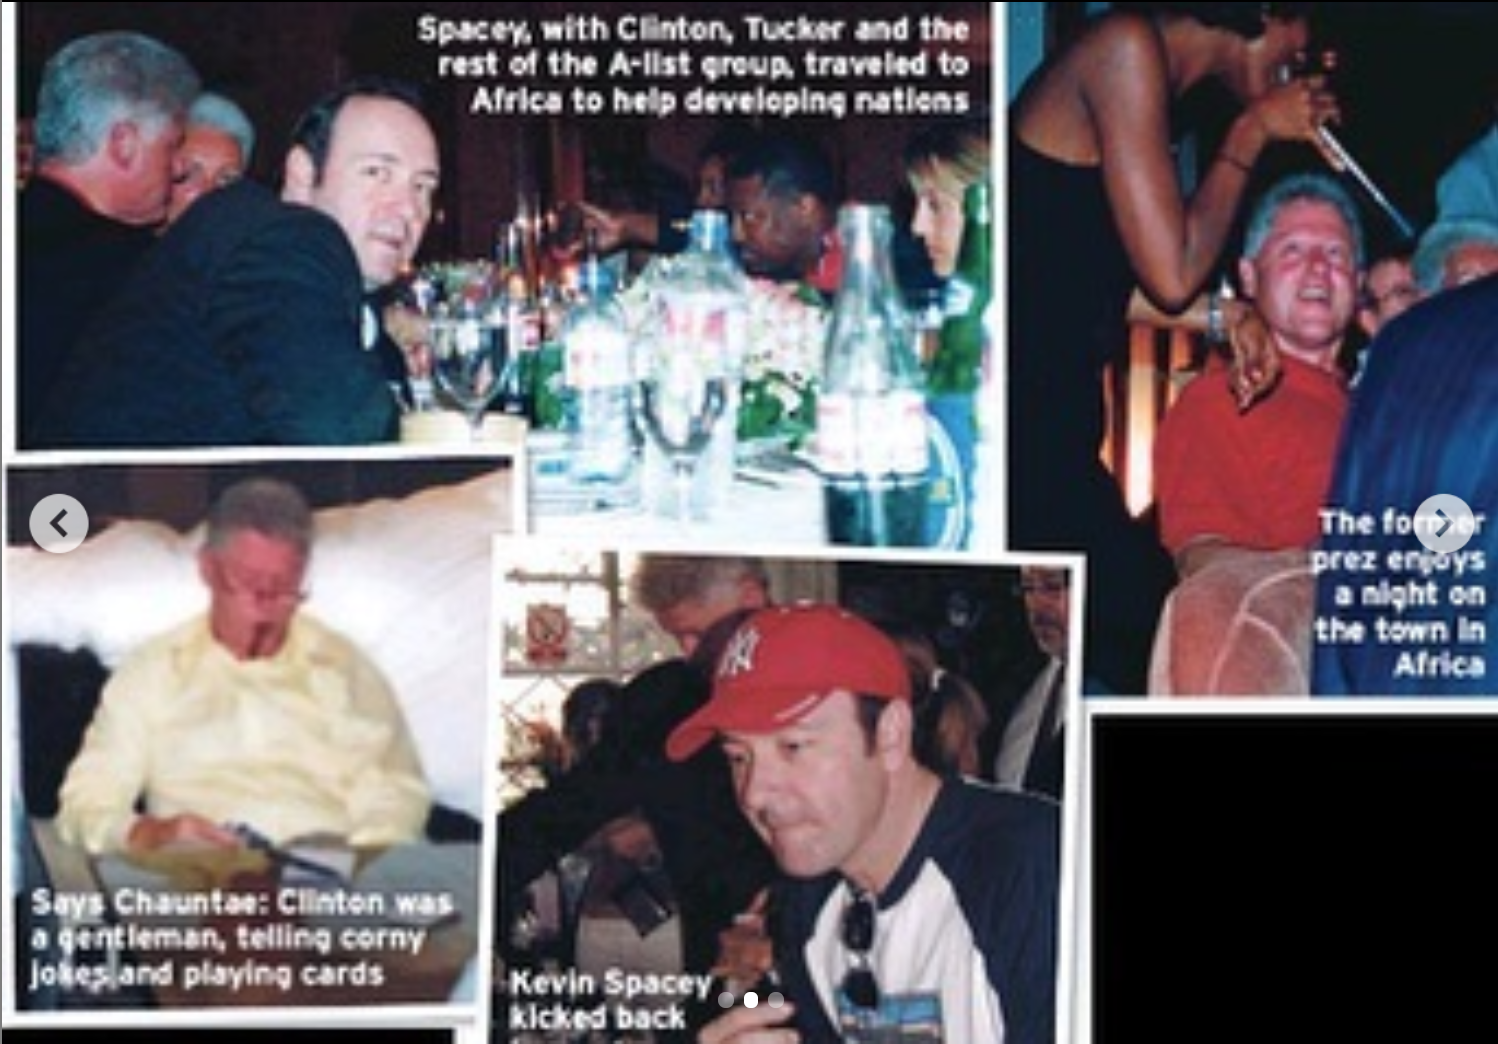 celebrities with ghislaine maxwell - event - Spacey, with Clinton, Tucker and the rest of the Alist group traveled to Africa to help developing natiens The for prez enjoys a night on the town in Africa Says Chauntao Clinton was a gentleman, telling corny